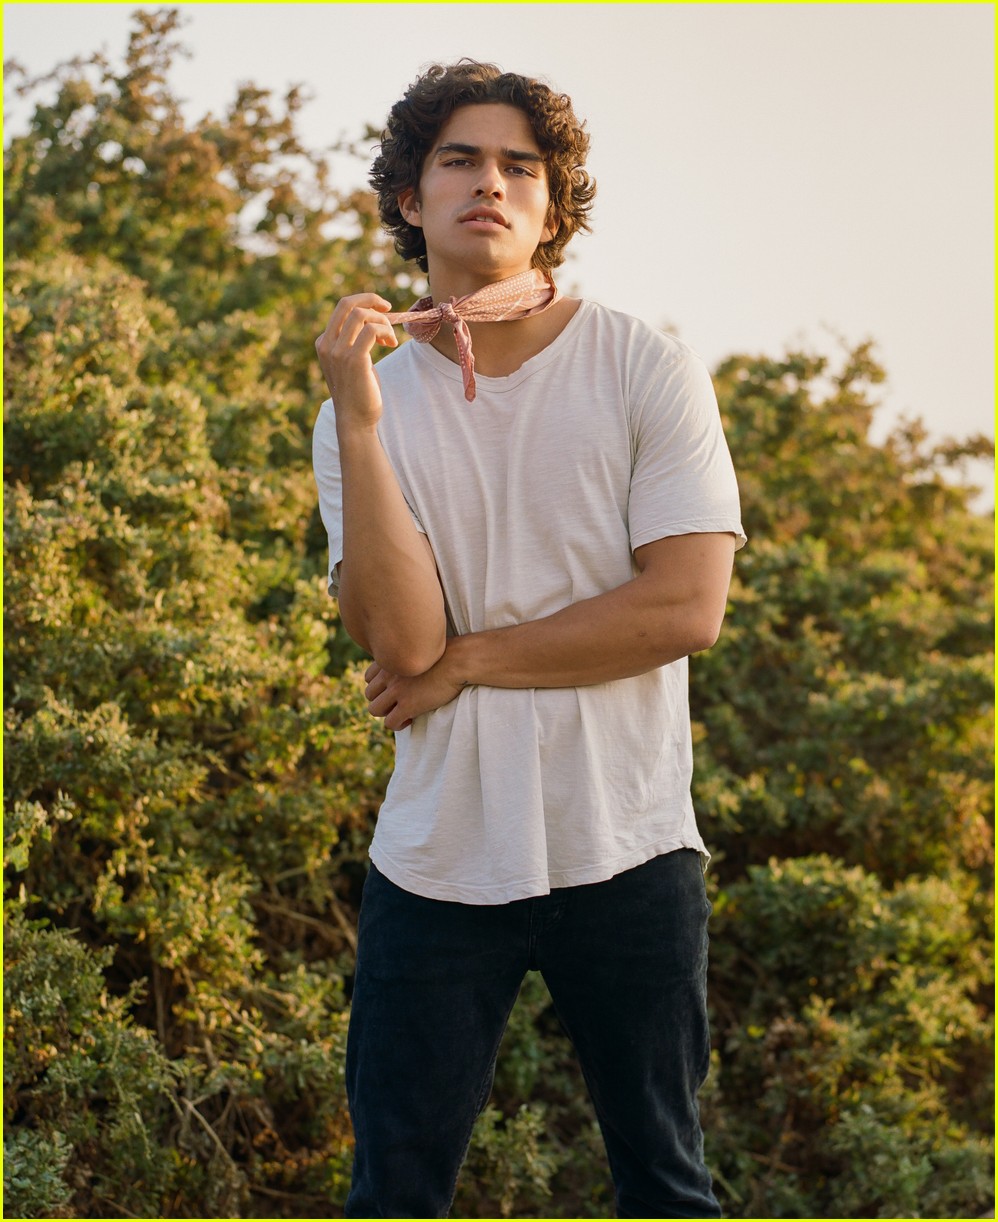 learn more about singer turned actor alex aiono with 10 fun facts 05